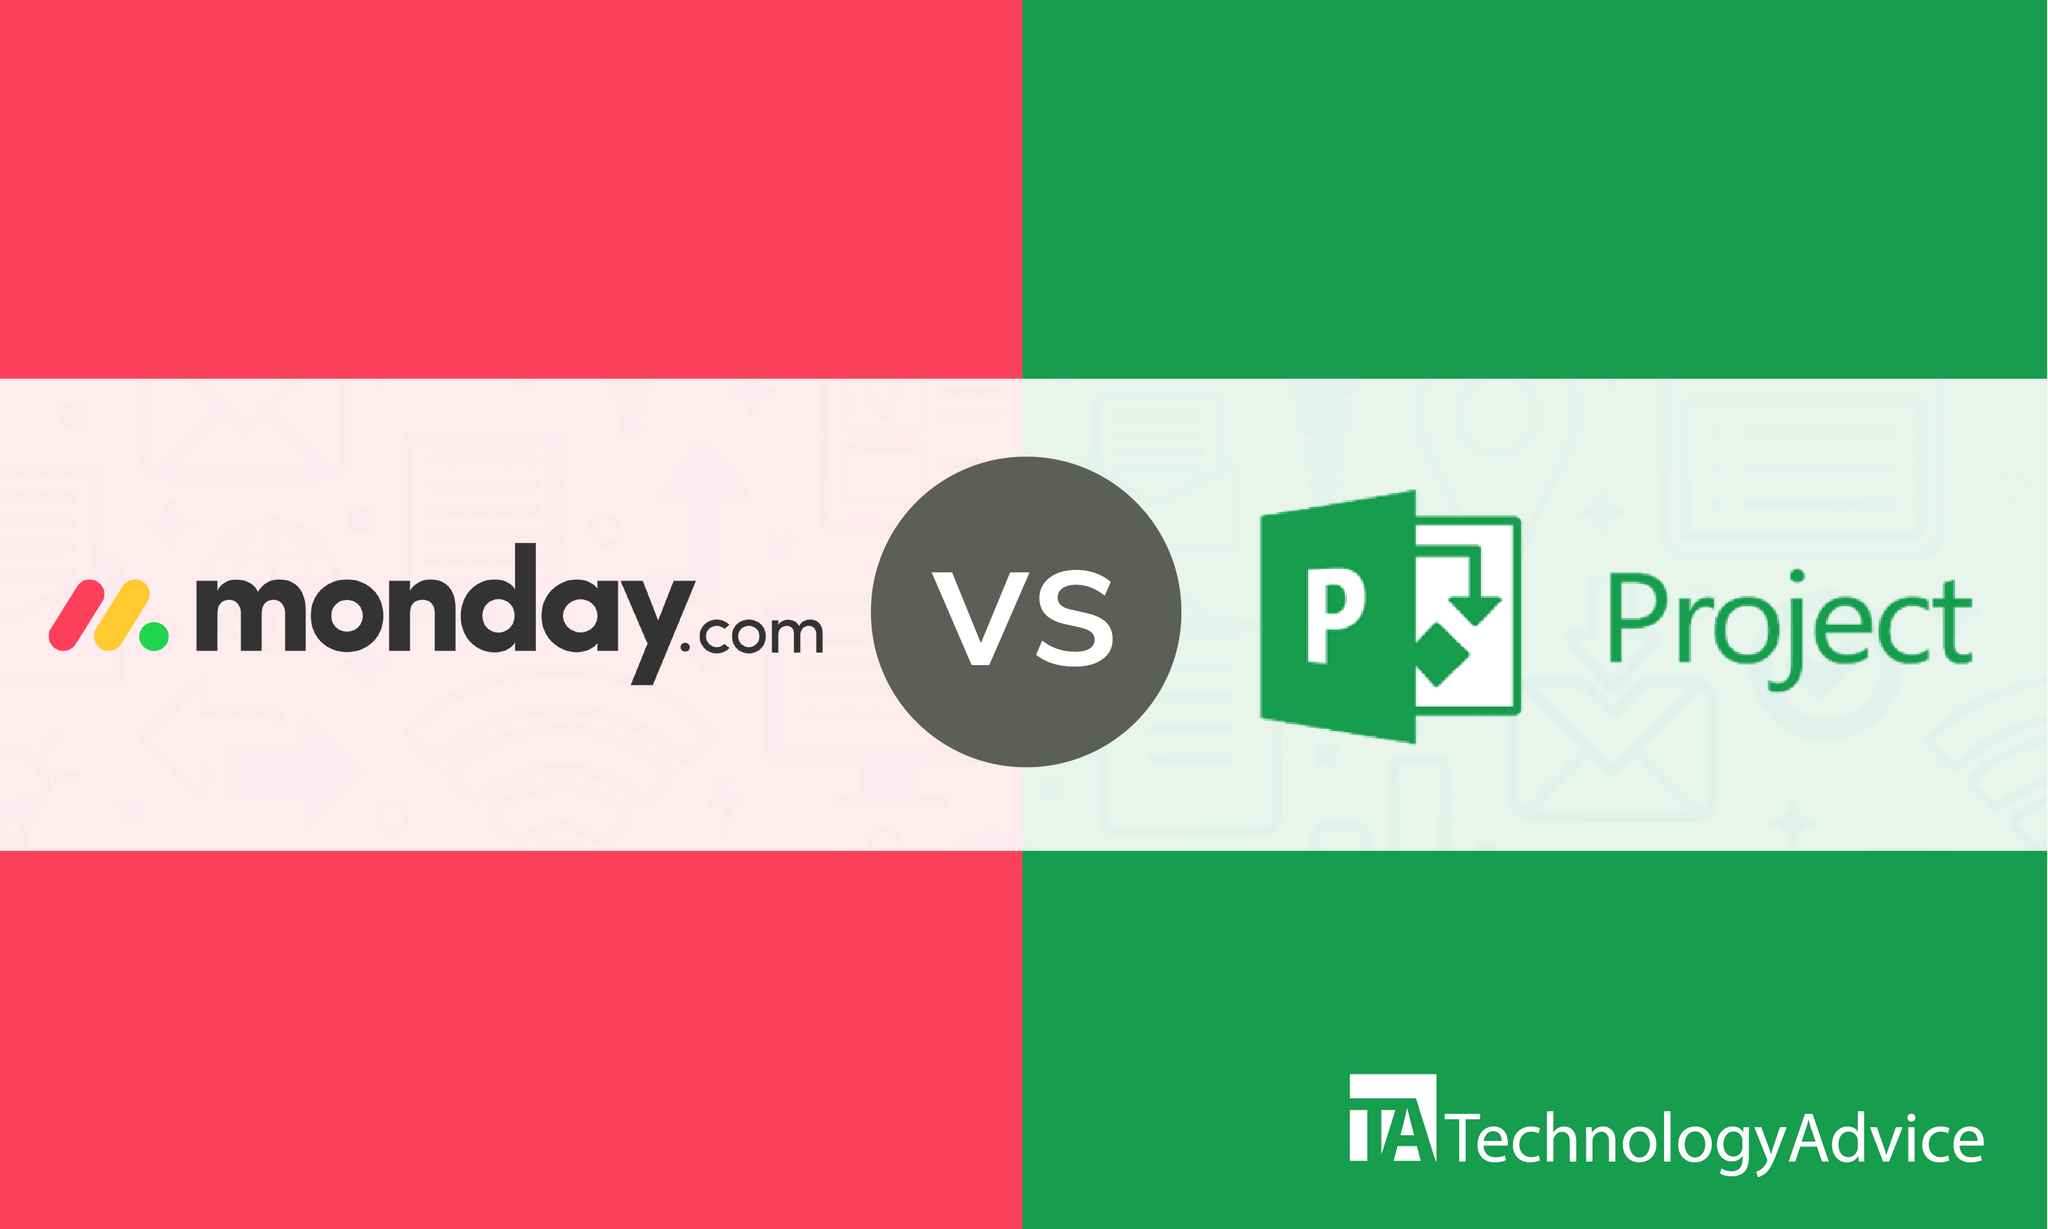 microsoft project vs monday: What You Need to Know Before Buying